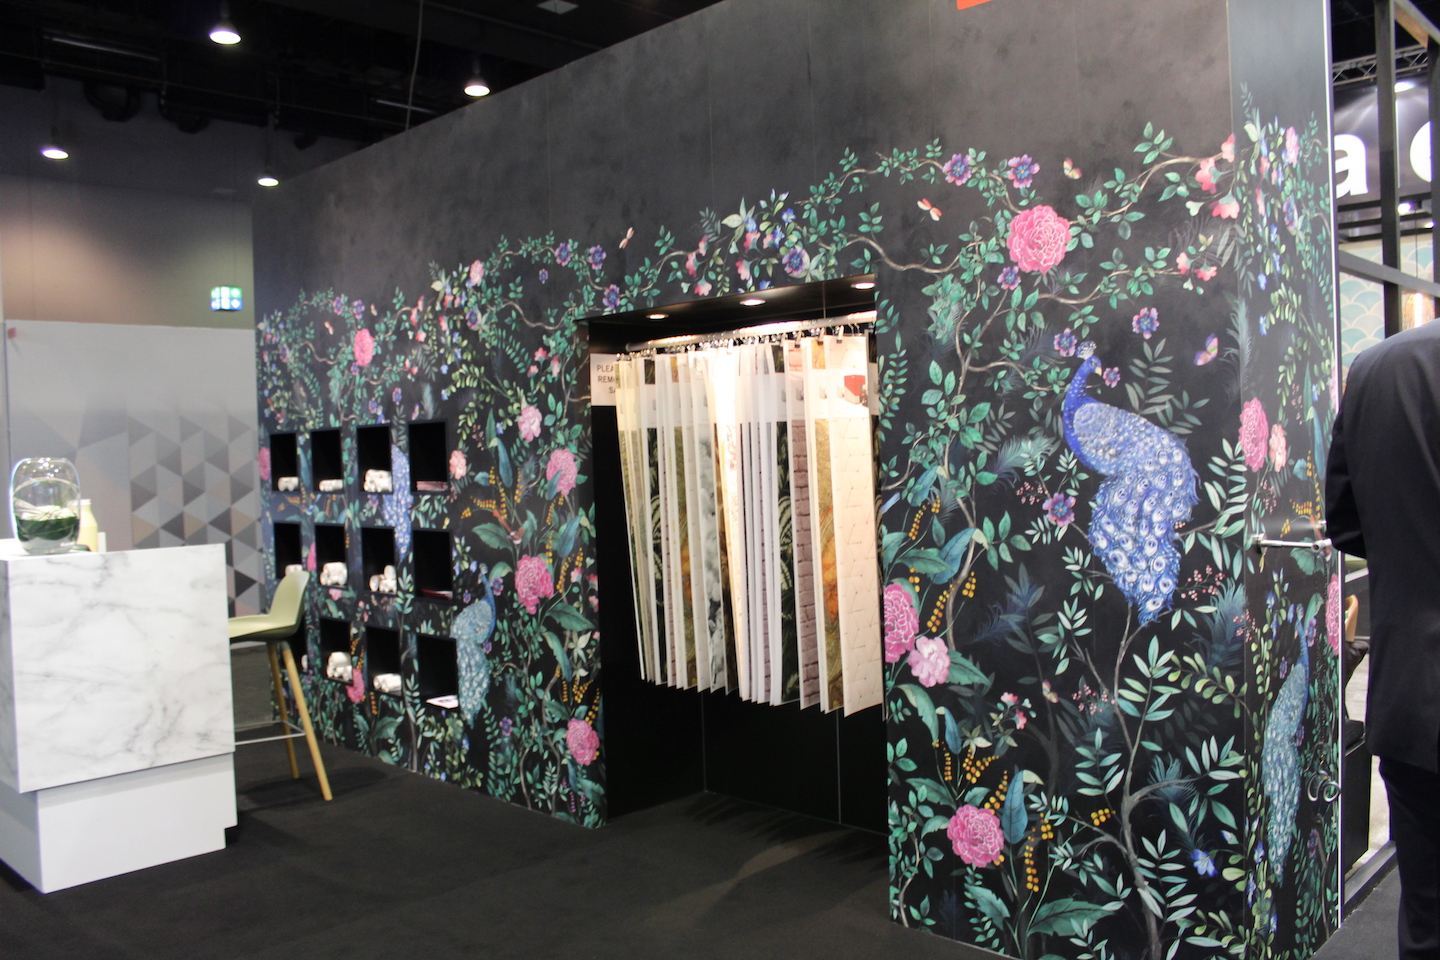 Wallpapers and wallpaper solutions, like the ones offered by Xeikon at last years Heimtextil, are growing in importance for interior architects and designers